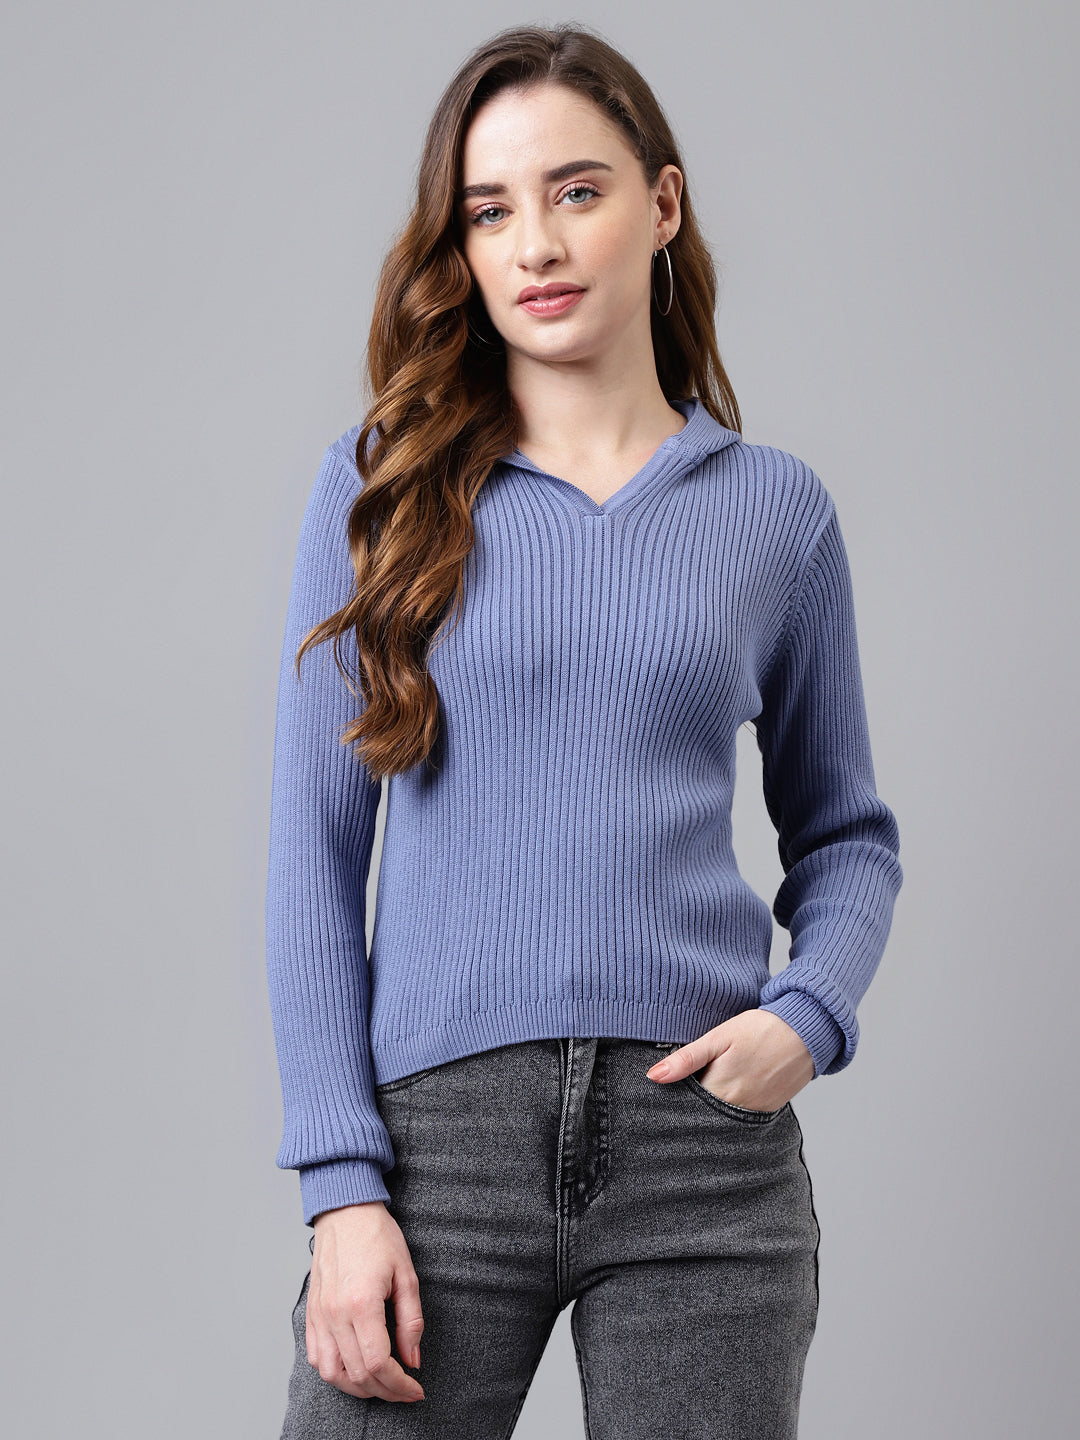 Blue Full Sleeve Solid Women Hoodie Sweater top for Casual